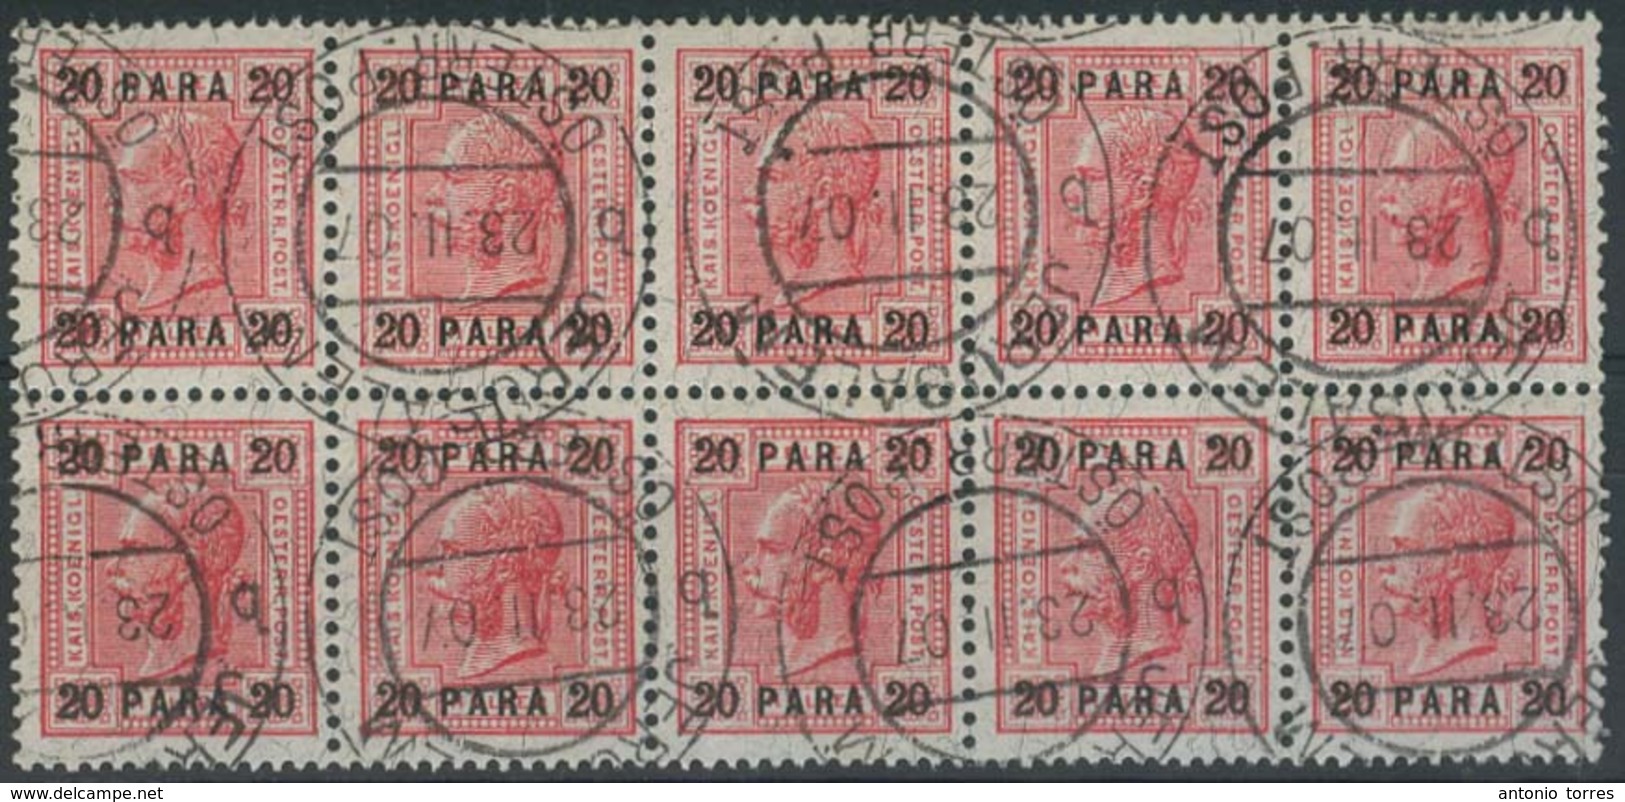 LEBANON. C.1867-1900. Austria PO 12 Stamps / Beyrouth Cancels Diff Types. Some Better Values. Useful Group. - Liban